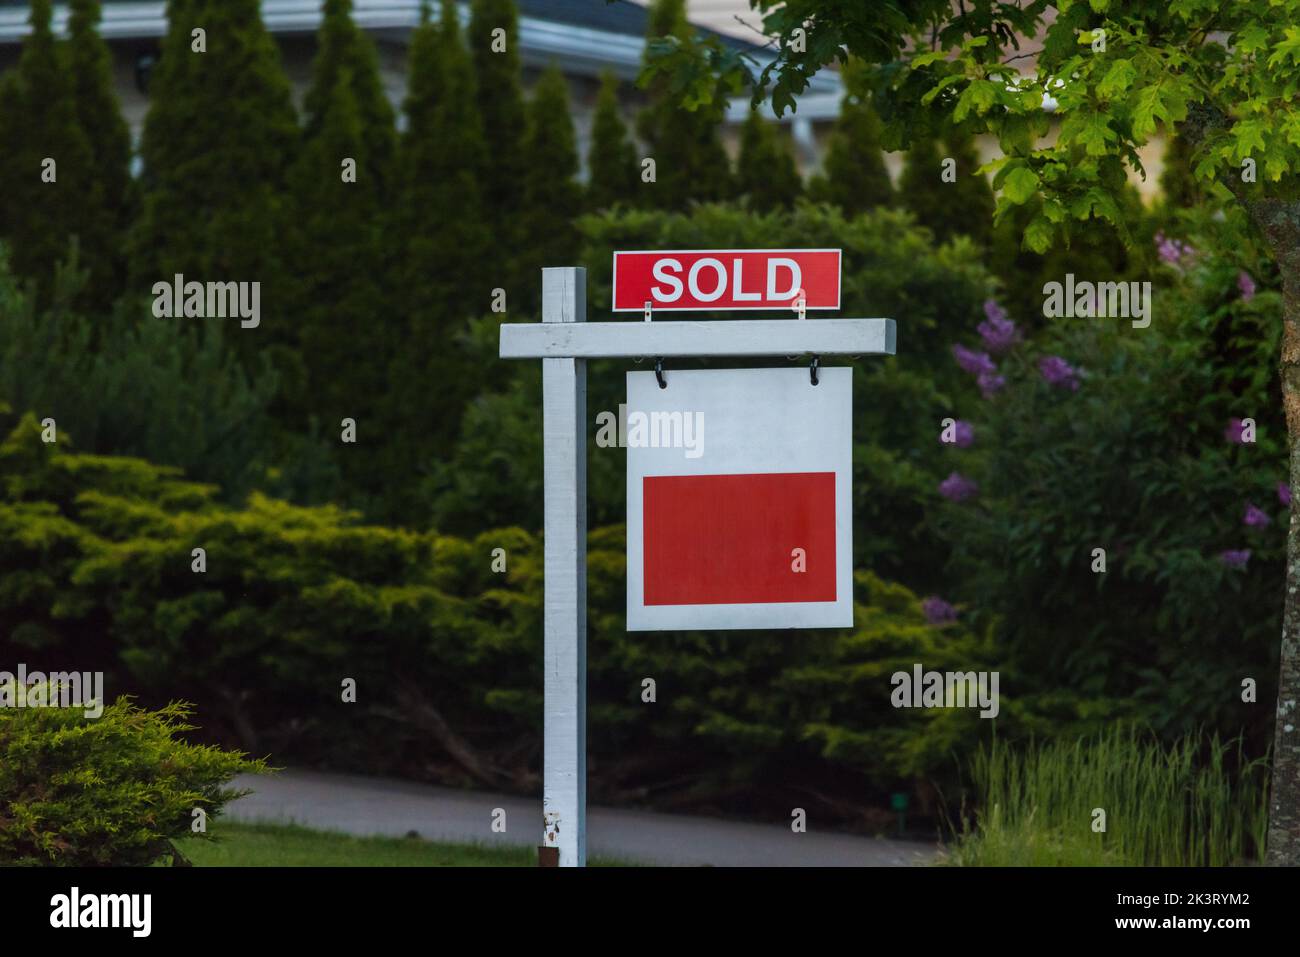 Real state agency SOLD sign. Real estate market property sold sign in front of new house. Copy space for Text. Stock Photo